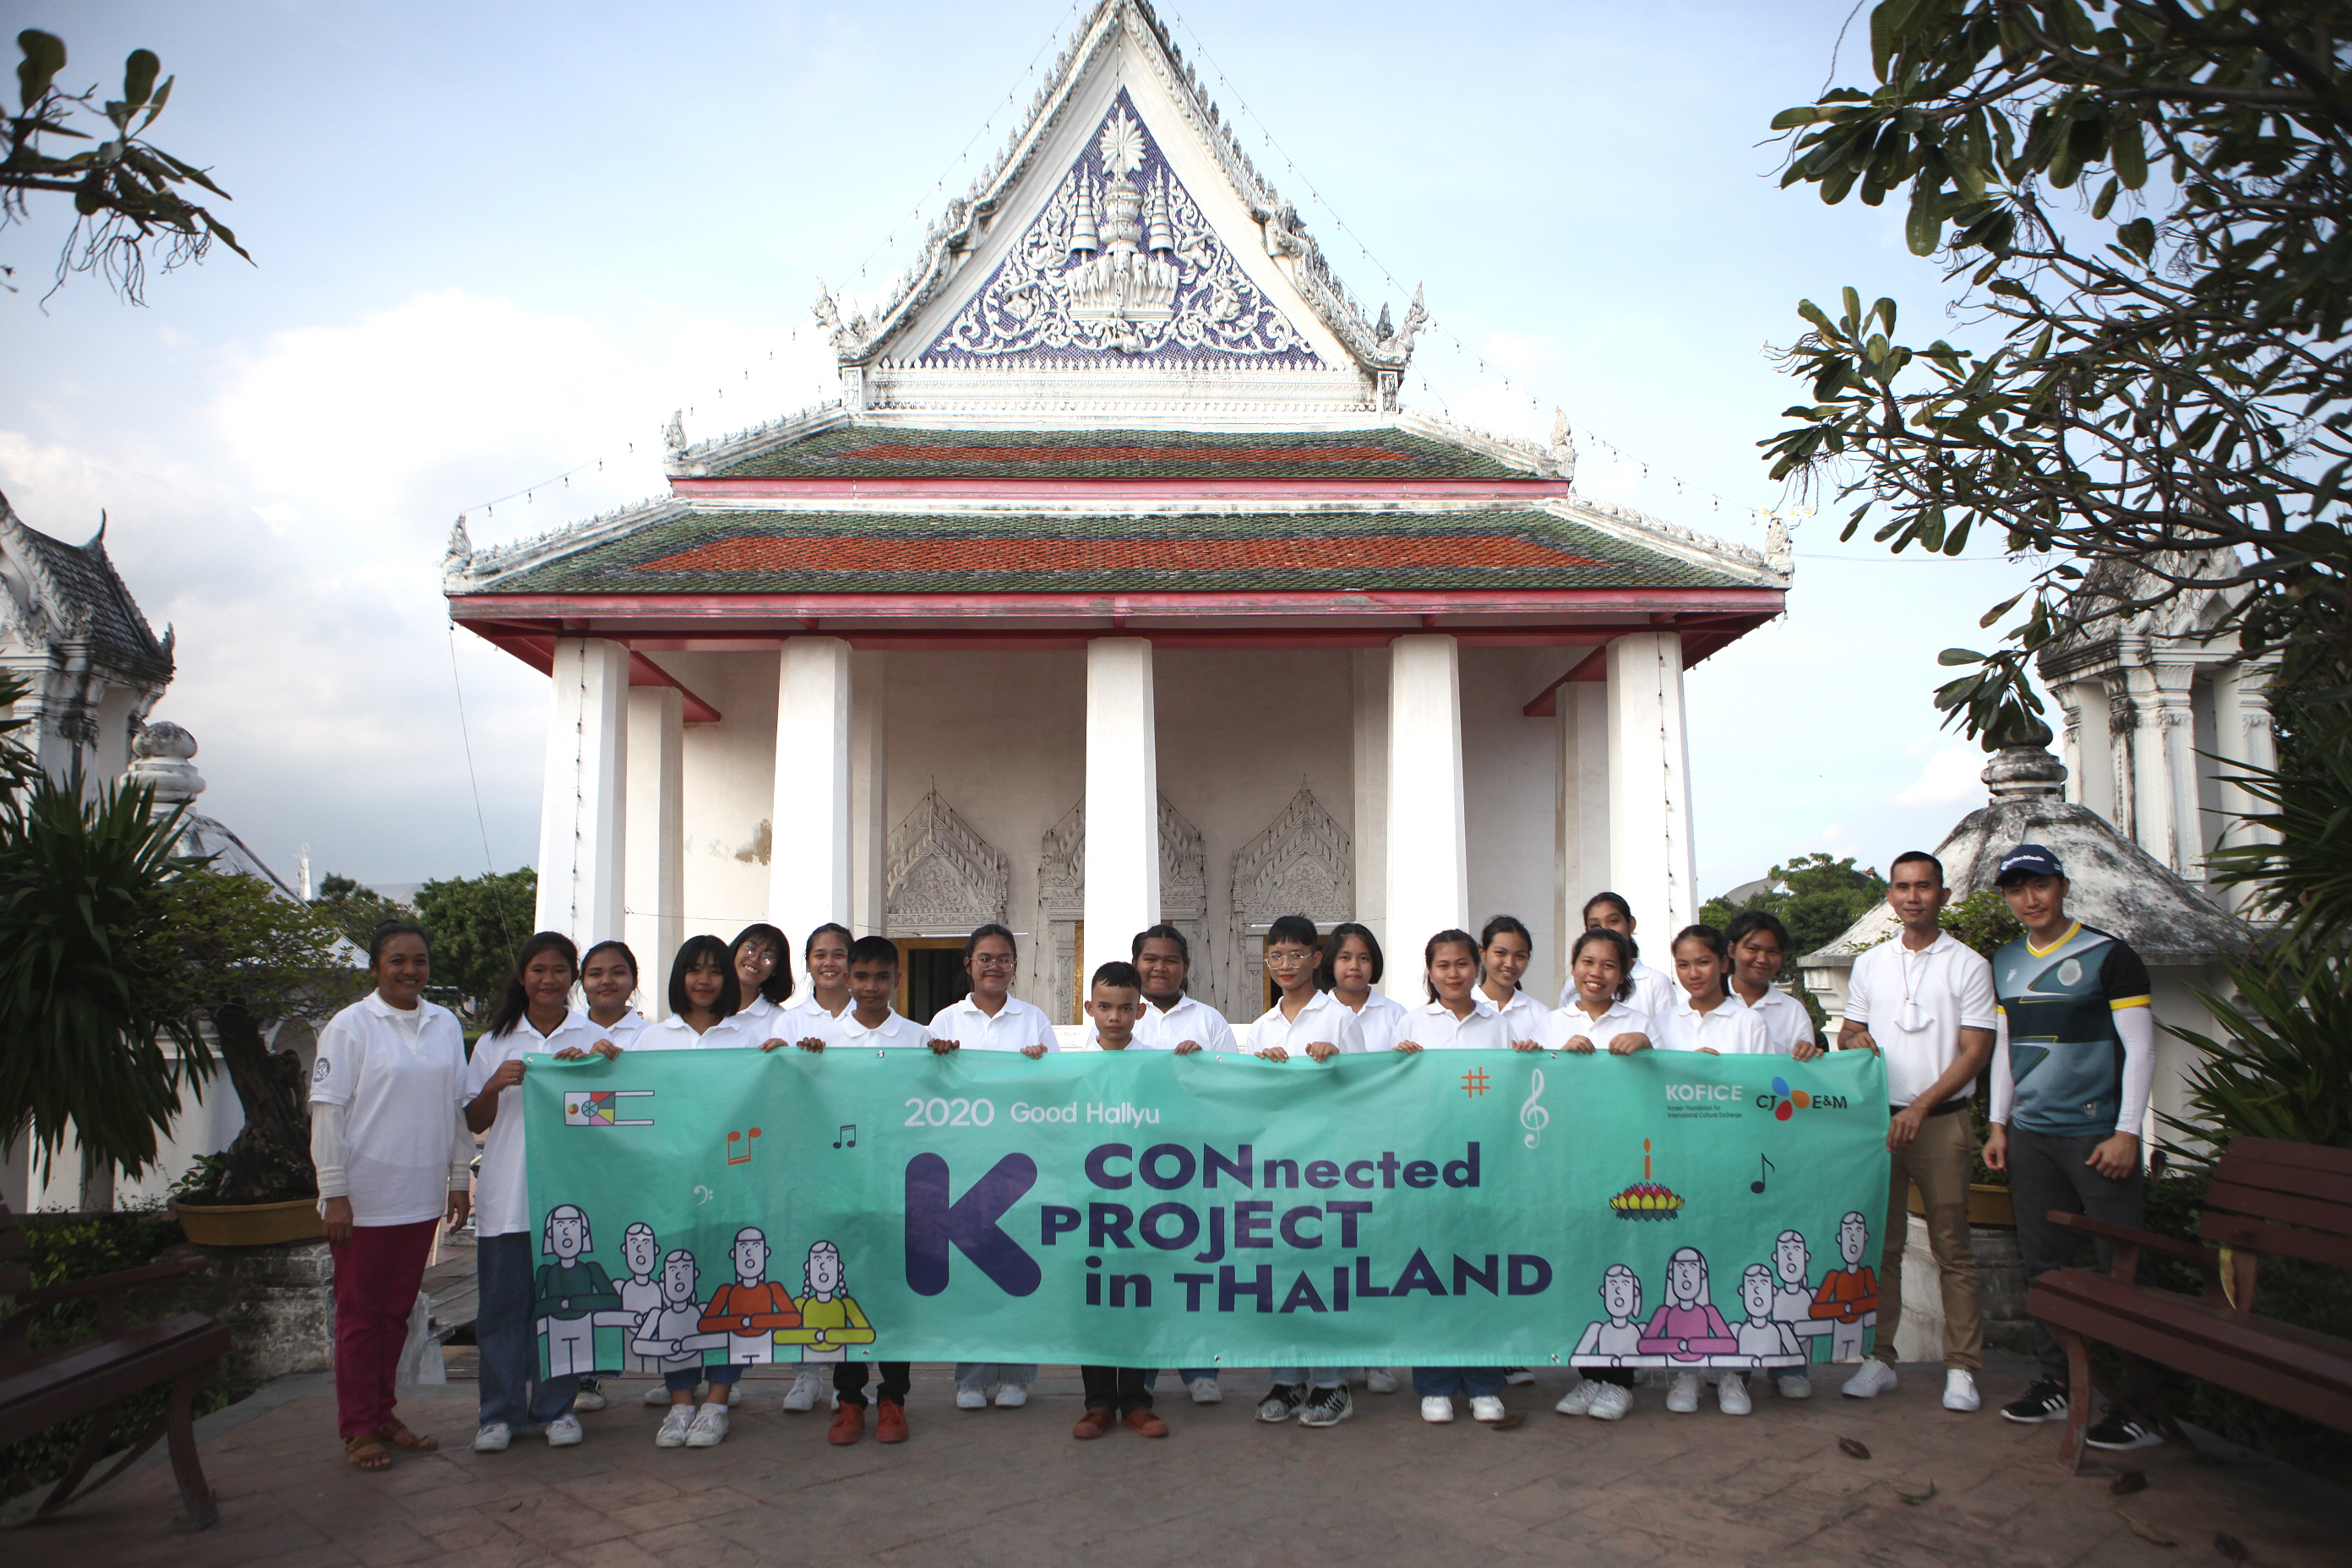 K-CONnected Project in Thailand 2020